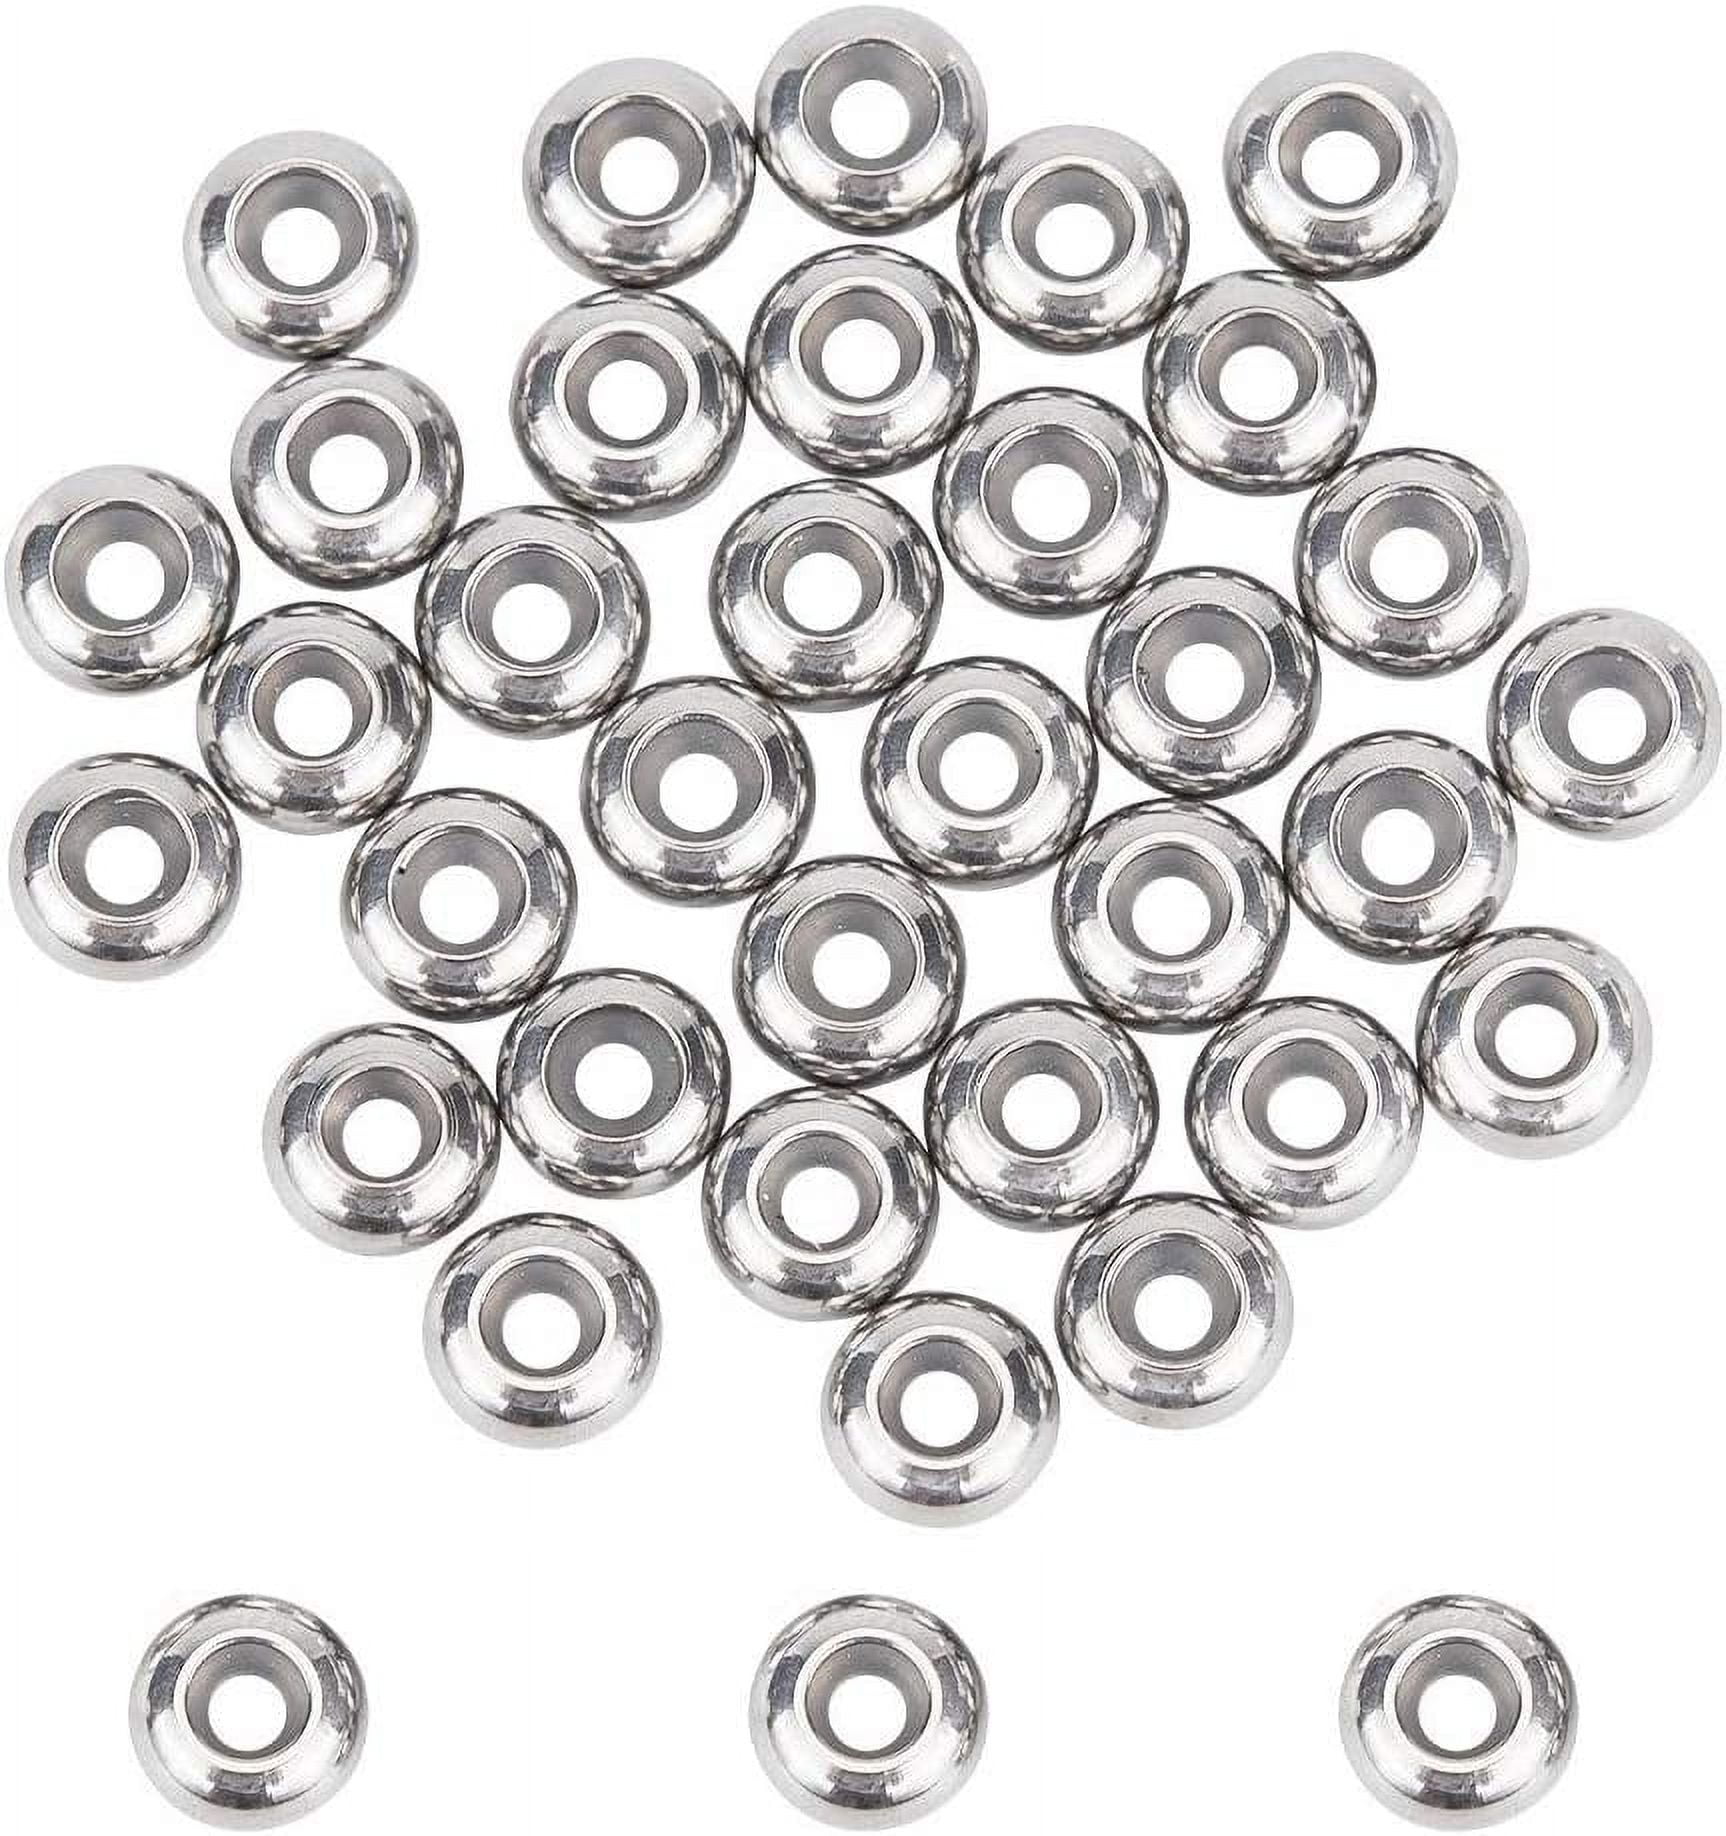 10pcs Round Ring Loose Beads Silver Color Clip Bead Stopper DIY